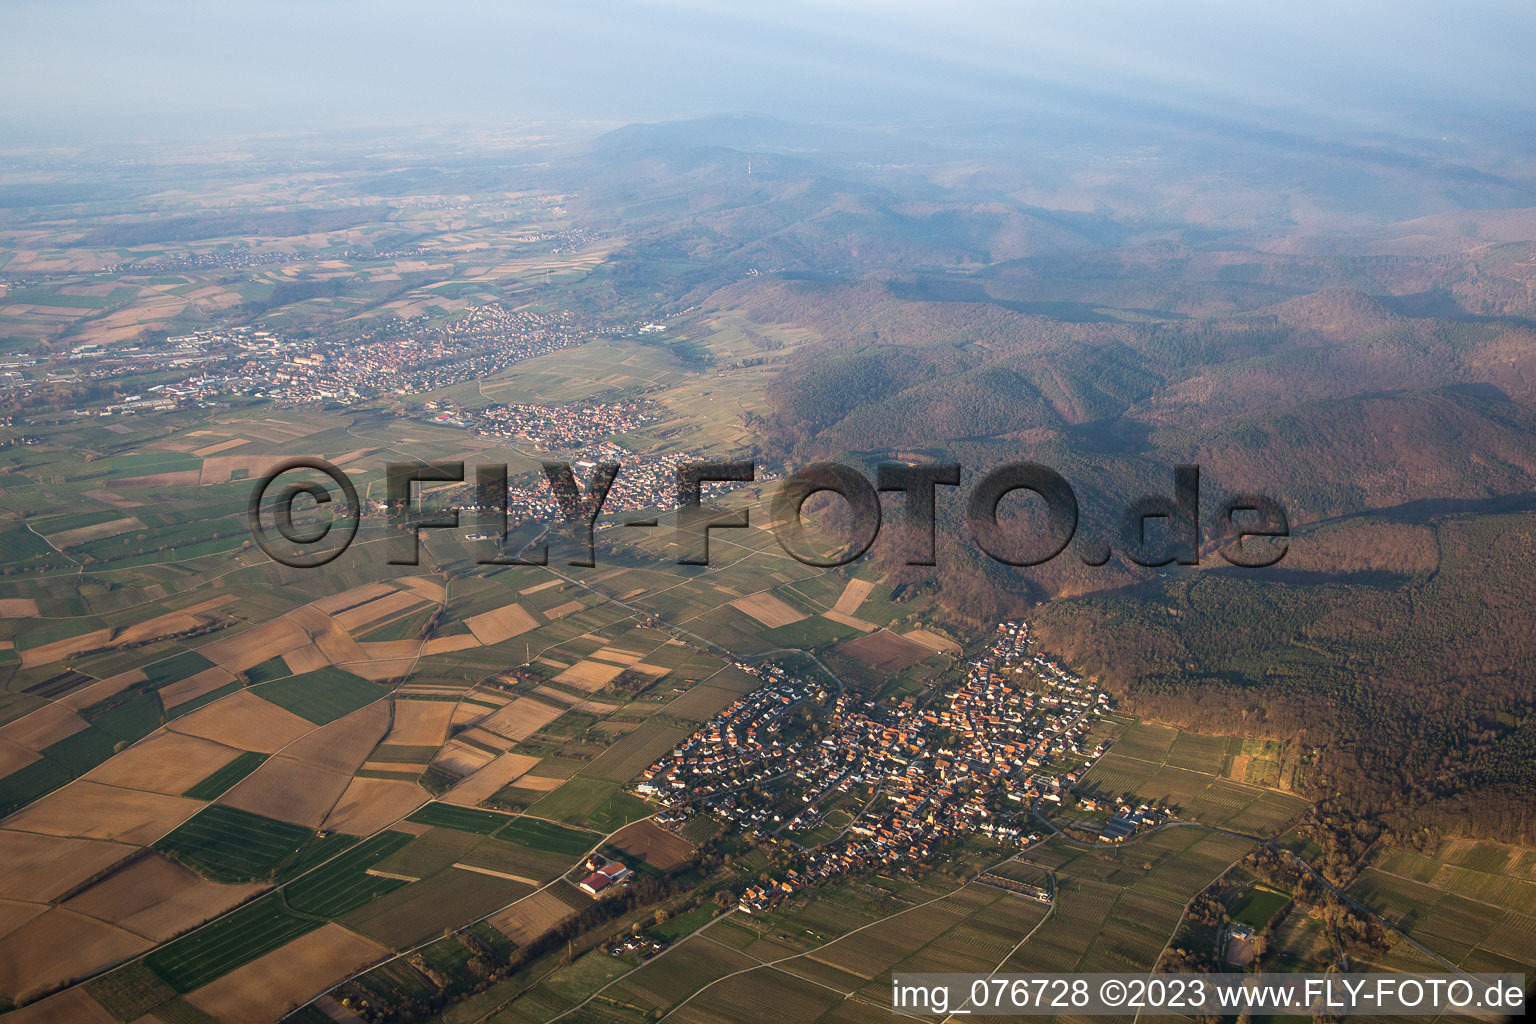 Oberotterbach in the state Rhineland-Palatinate, Germany from the plane